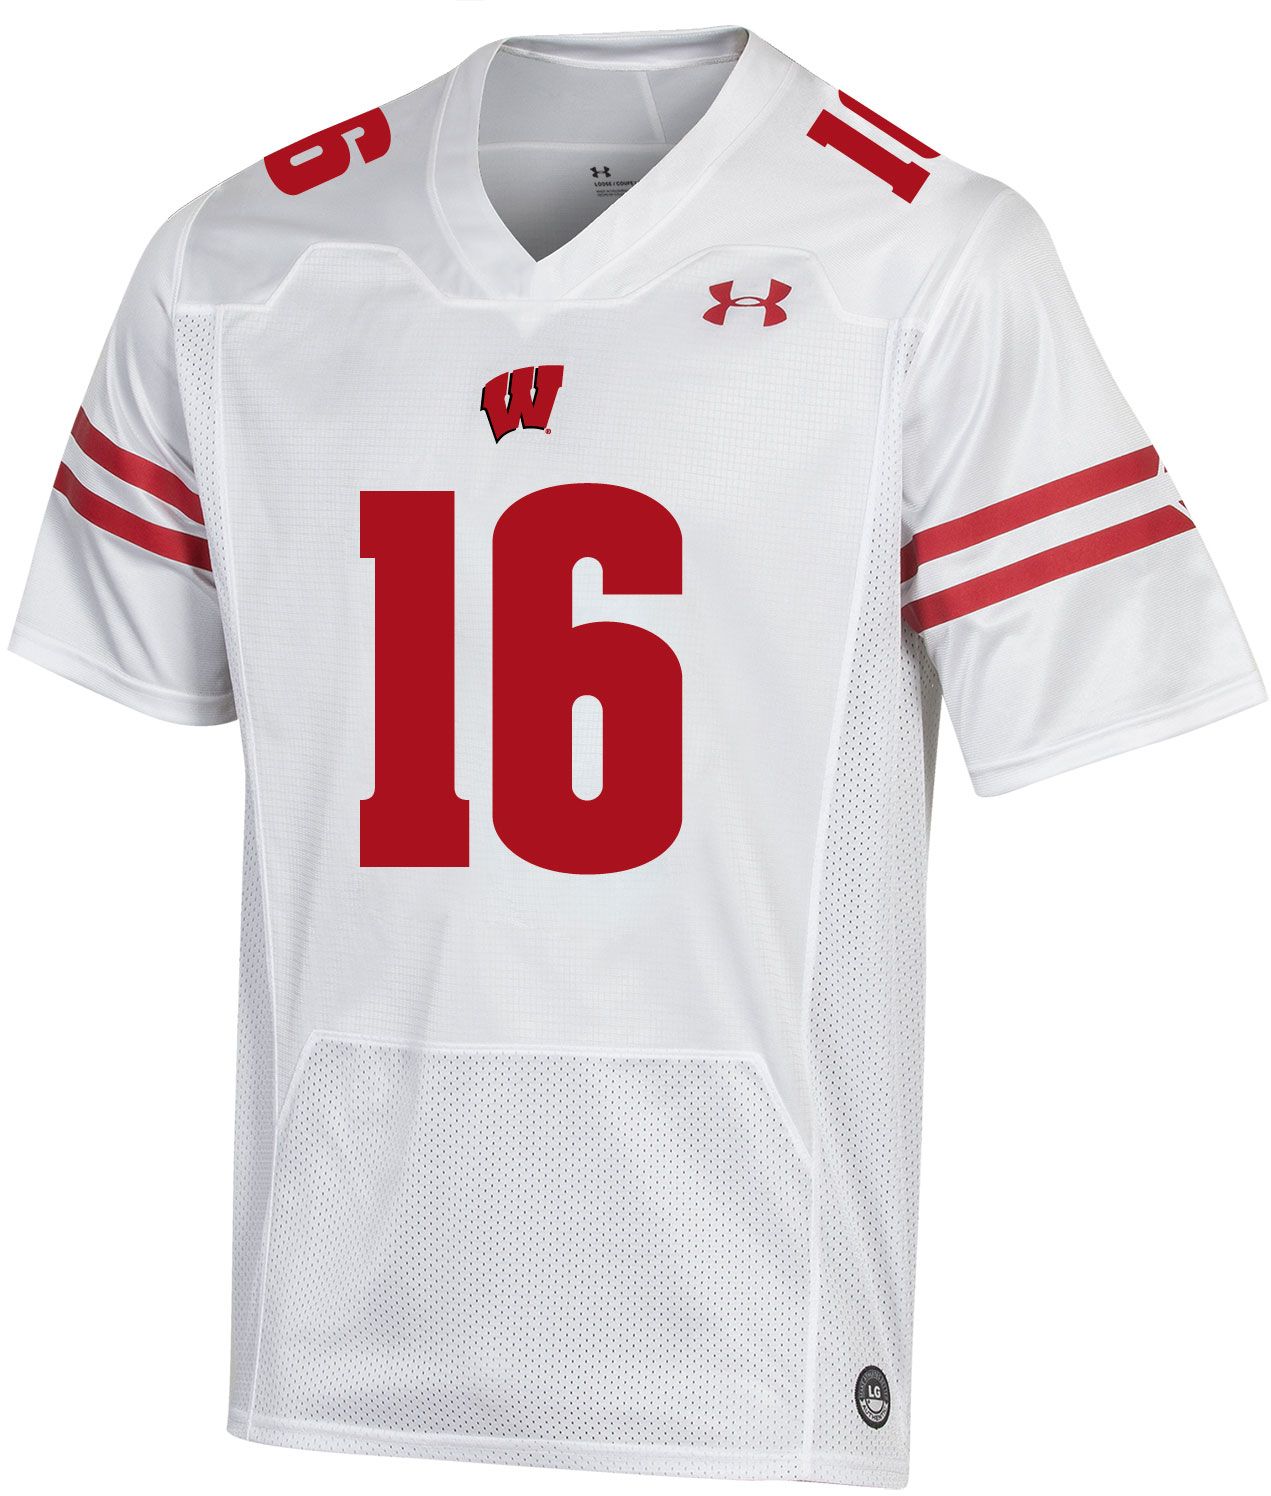 Badgers jersey collection